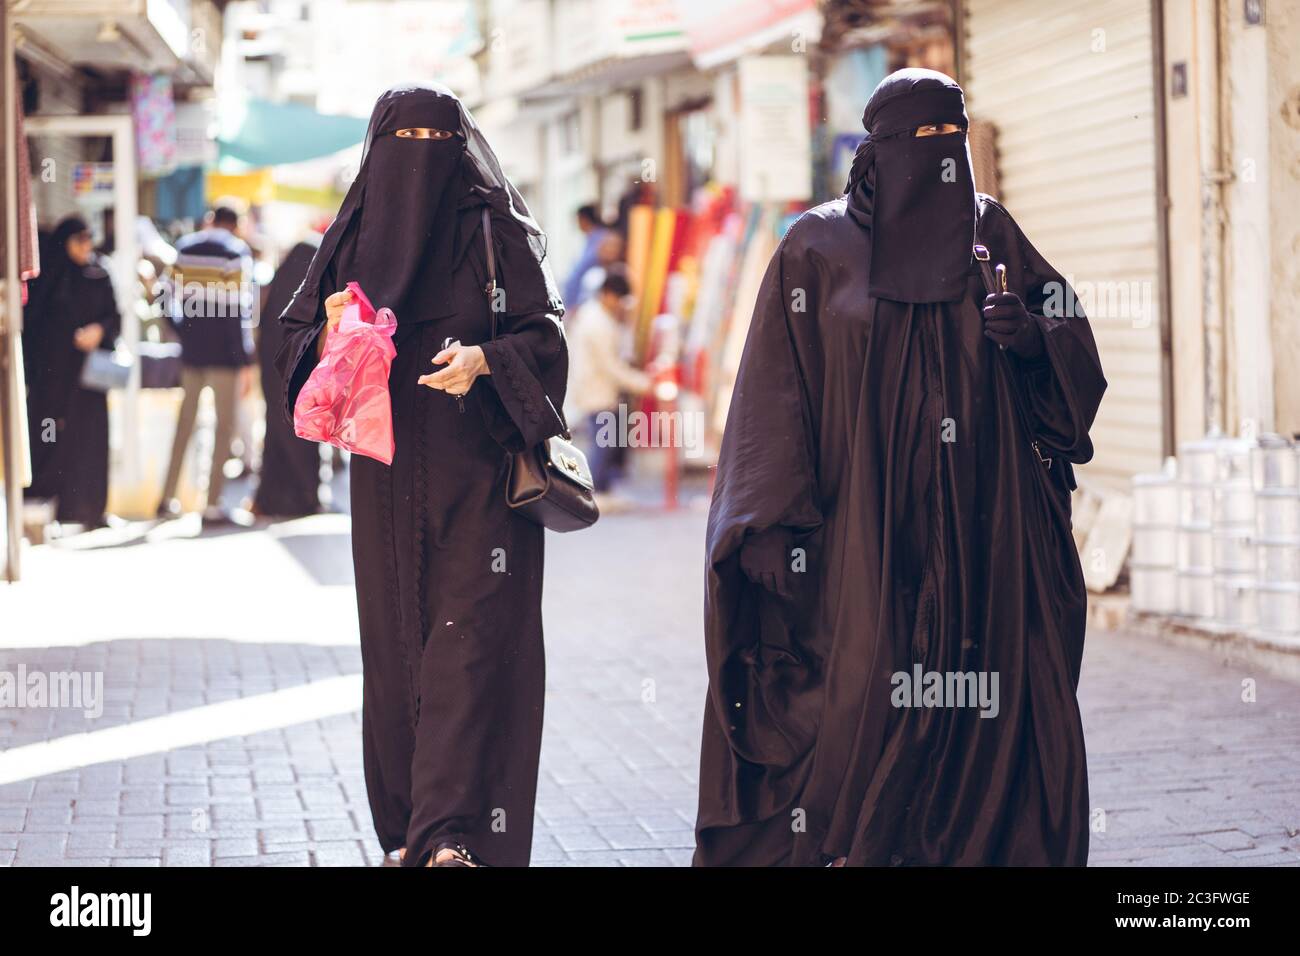 Manama / Bahrain - January 10, 2020: Muslim women wearing traditional black abaya niqab while shopping in Manama Souq, also a famous tourist destination in the capital of Bahrain Stock Photo